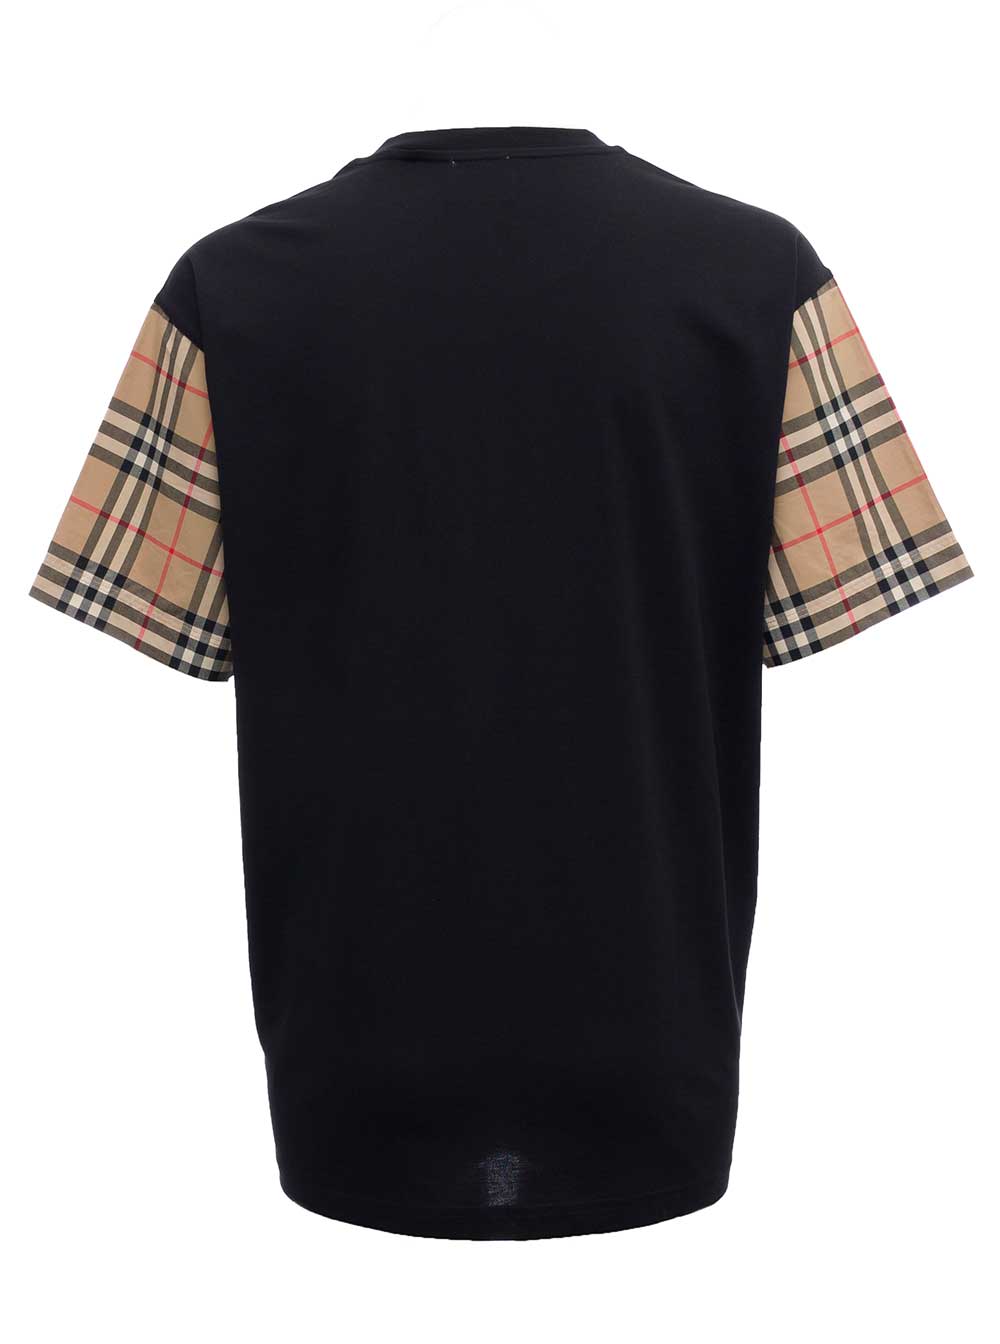 BURBERRY BLACK COTTON T-SHIRT WITH VINTAGE CHECK SLEEVES 